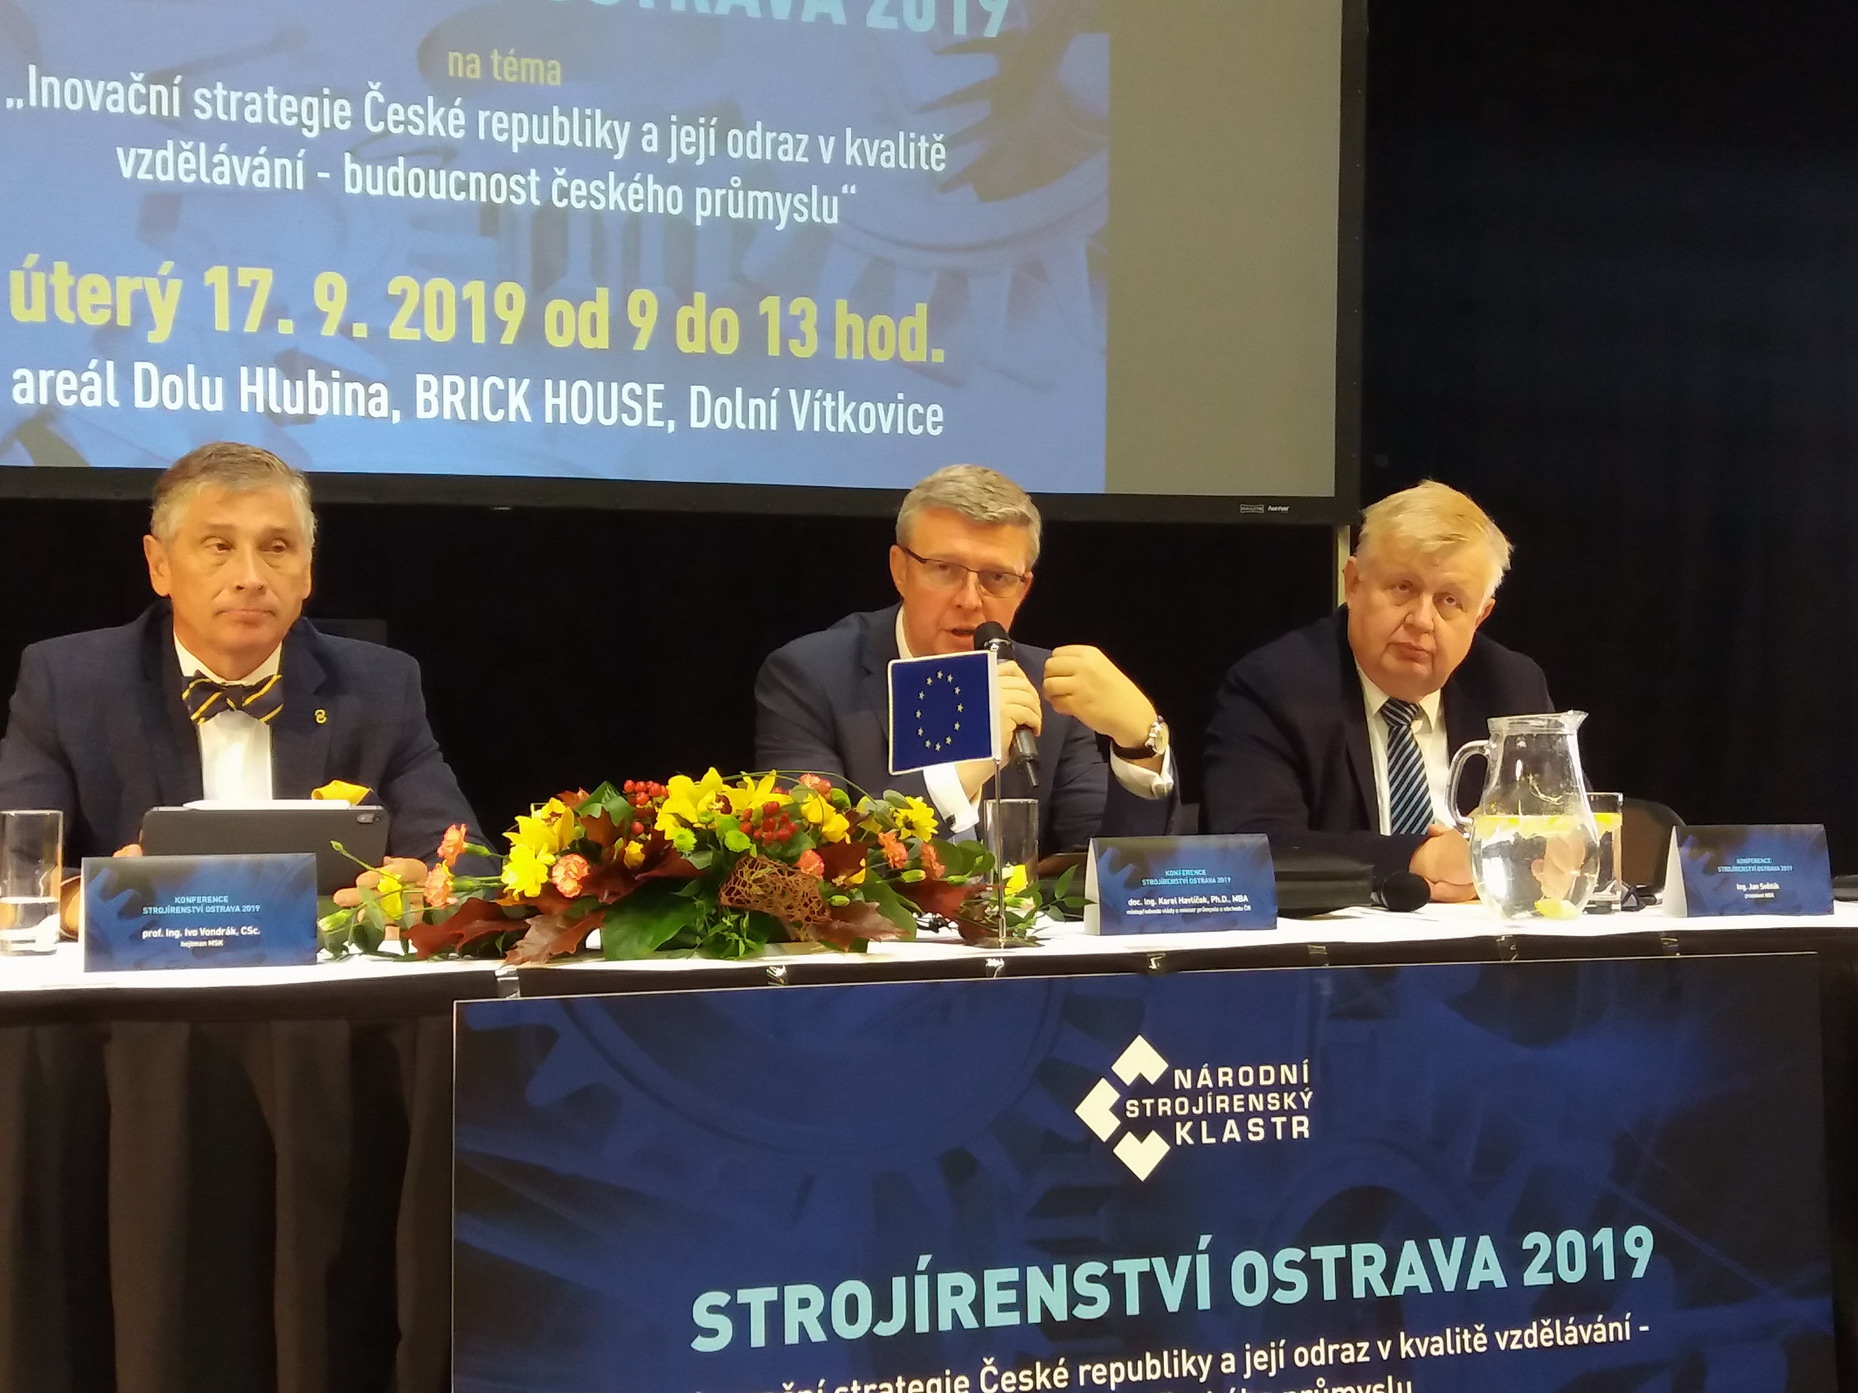 "Innovation and education" conference held in Vitkovice